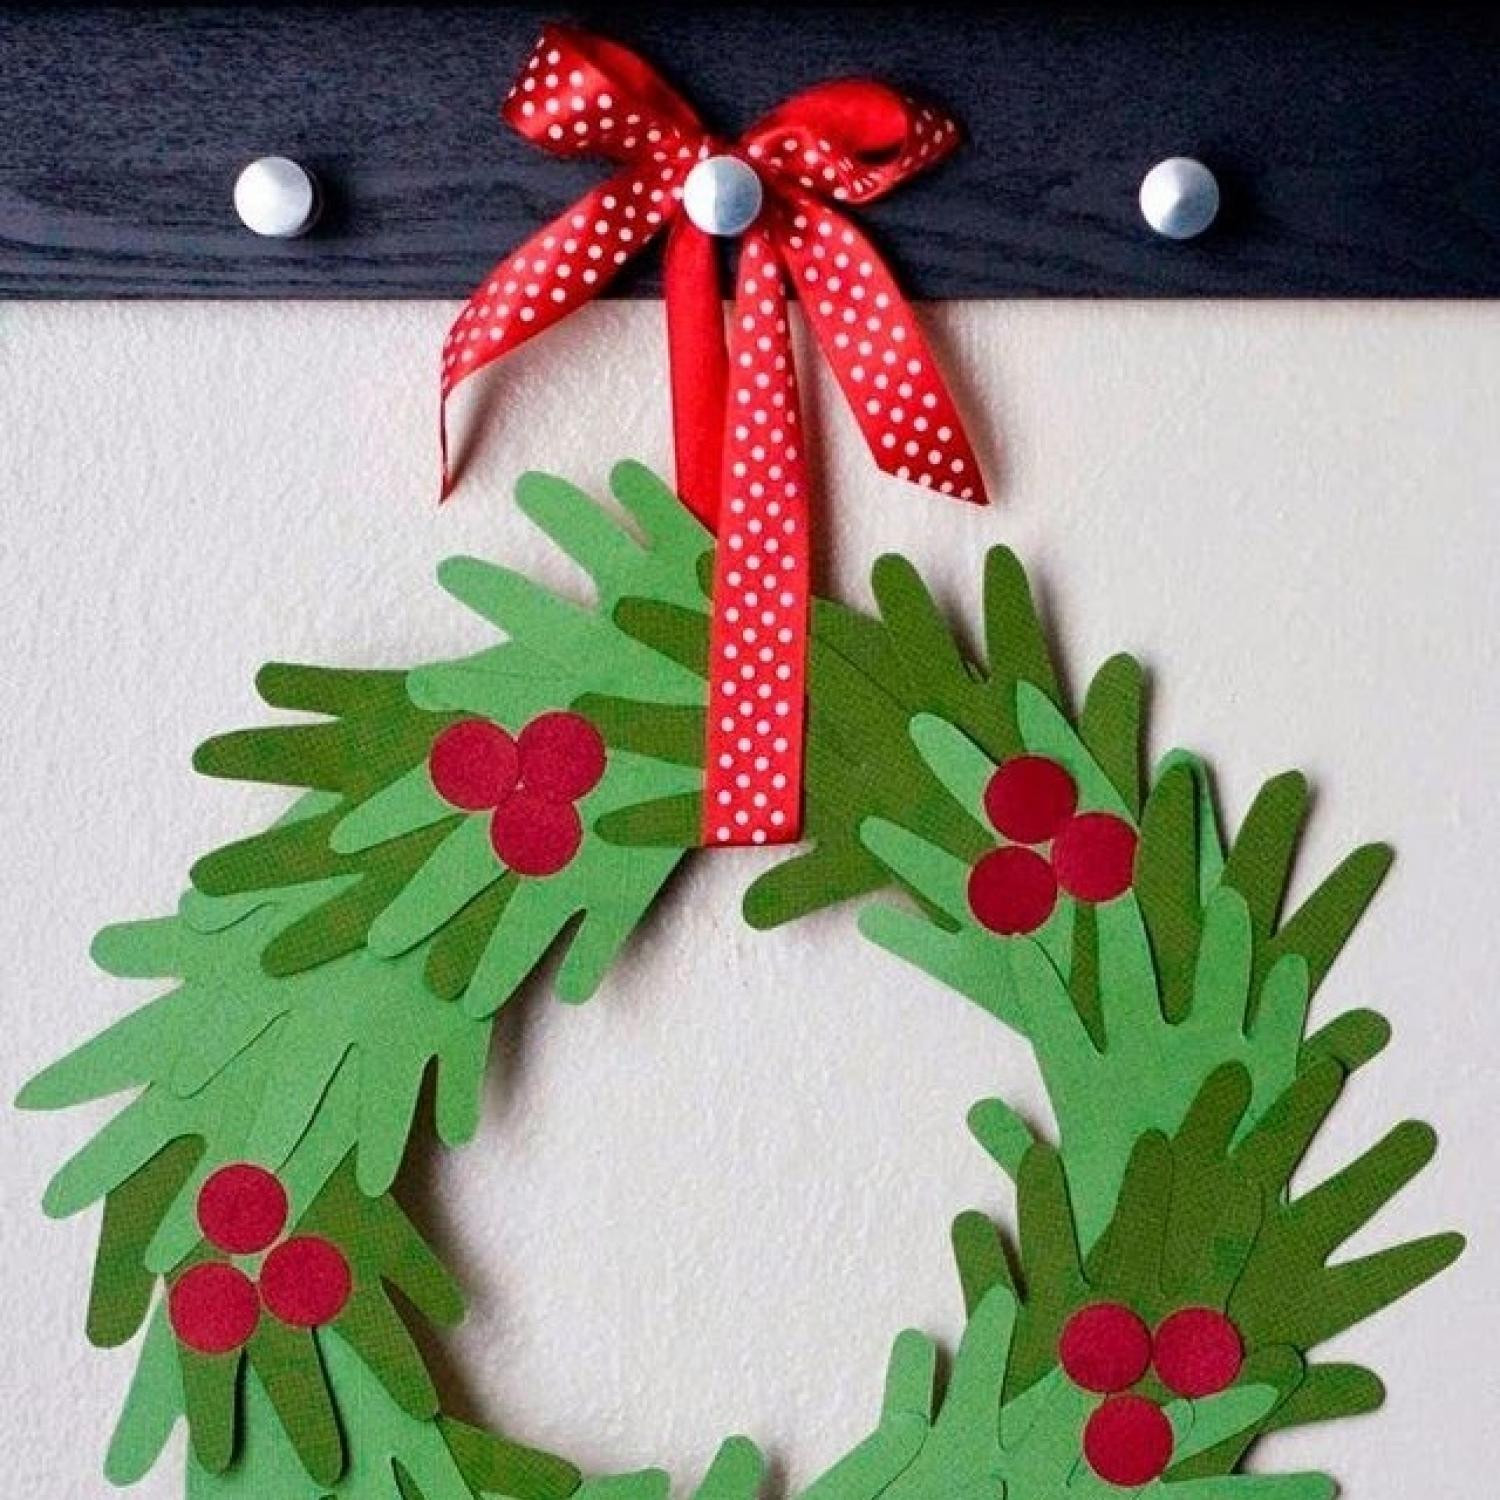 Christmas Crafting Projects
 10 Handprint Christmas Crafts for Kids